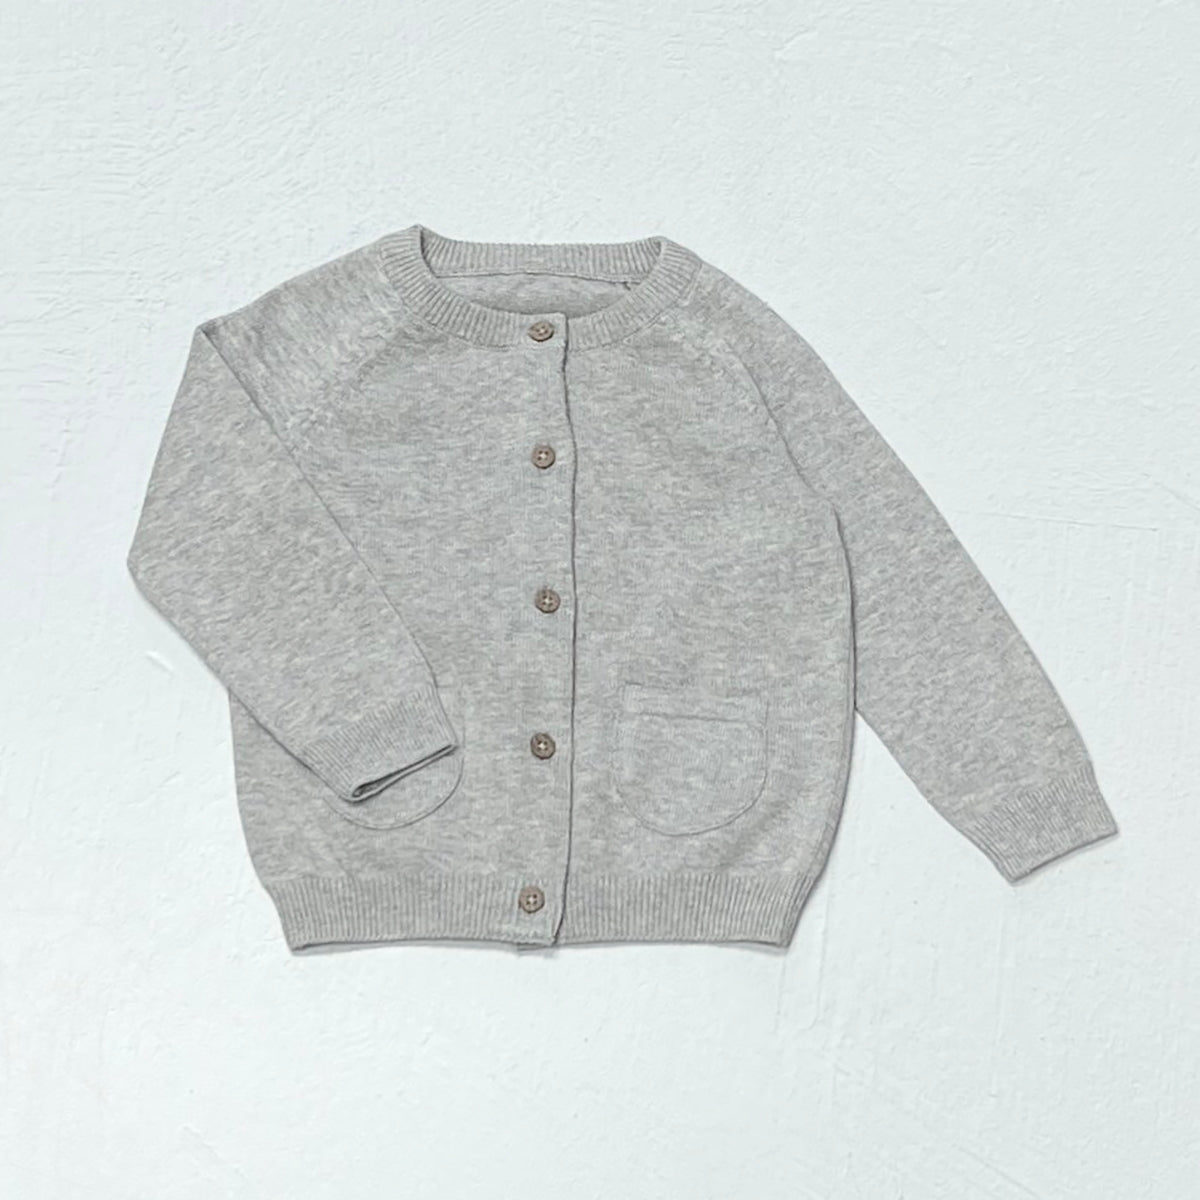 Milan Knit Classic Baby Button Cardigan - Heather Grey - Twinkle Twinkle Little One